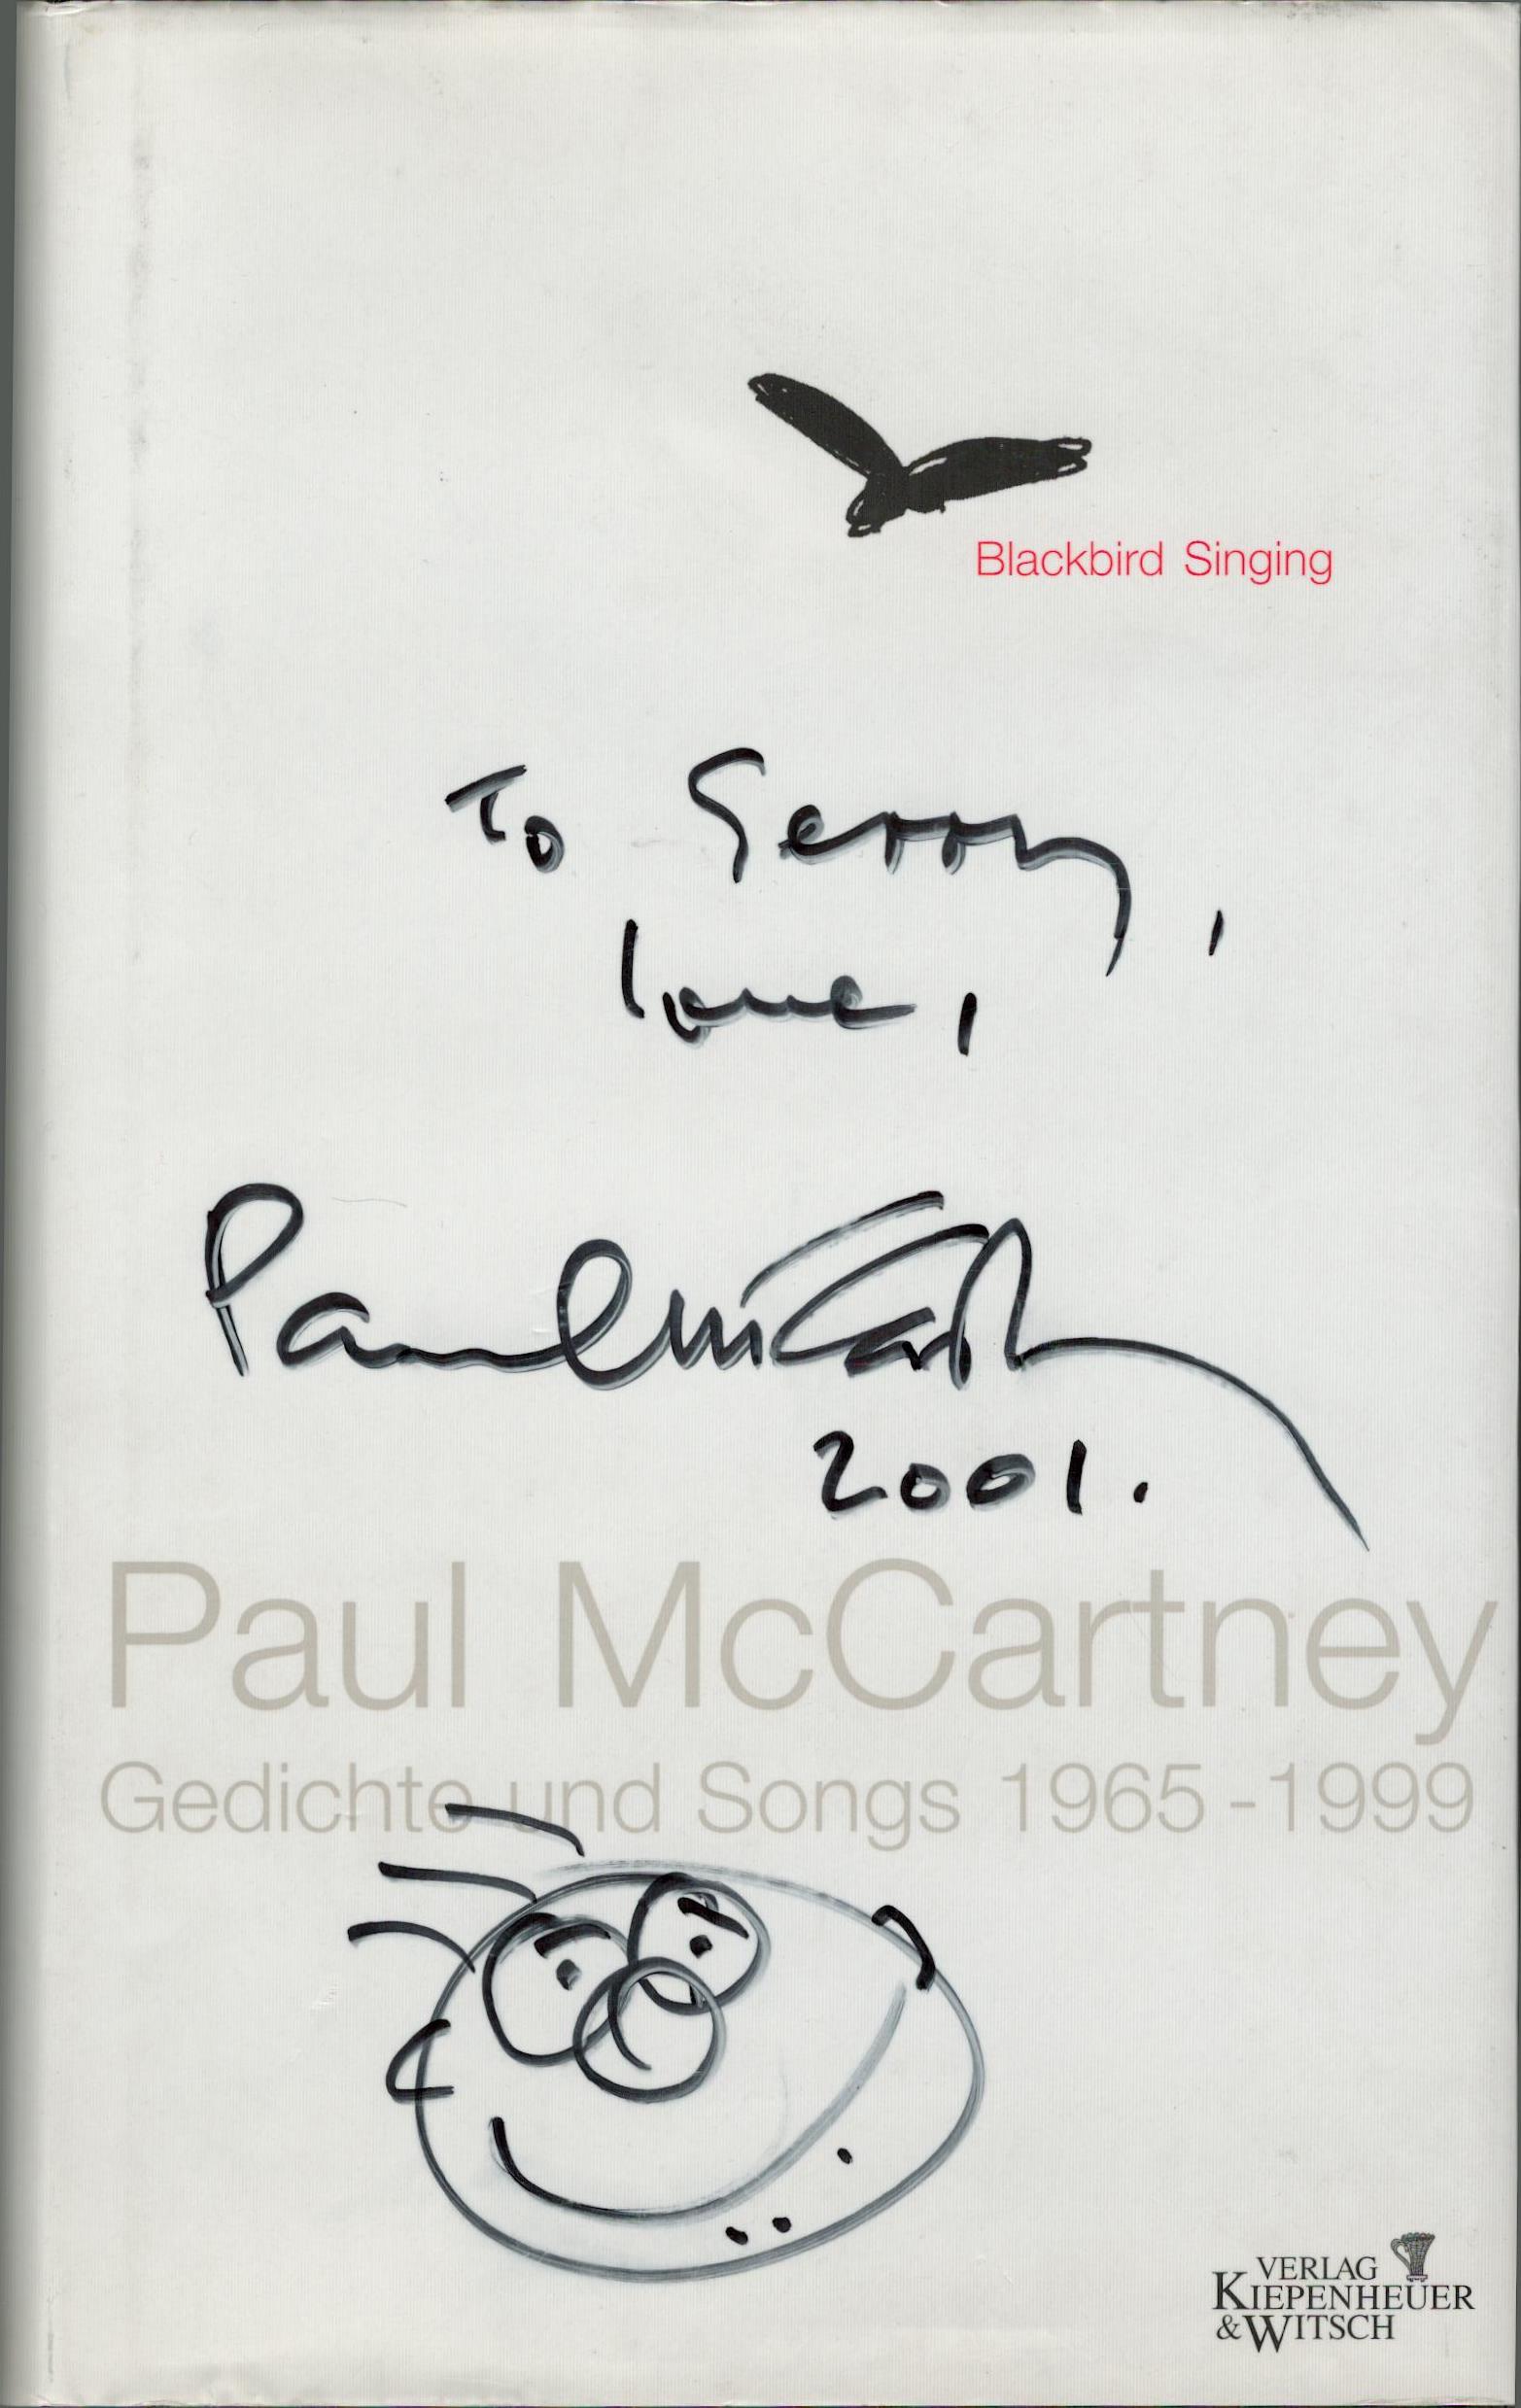 Paul McCartney signed Gedichto and Songs 1965-1999 Hardback book signature on cover dated 2001. Good